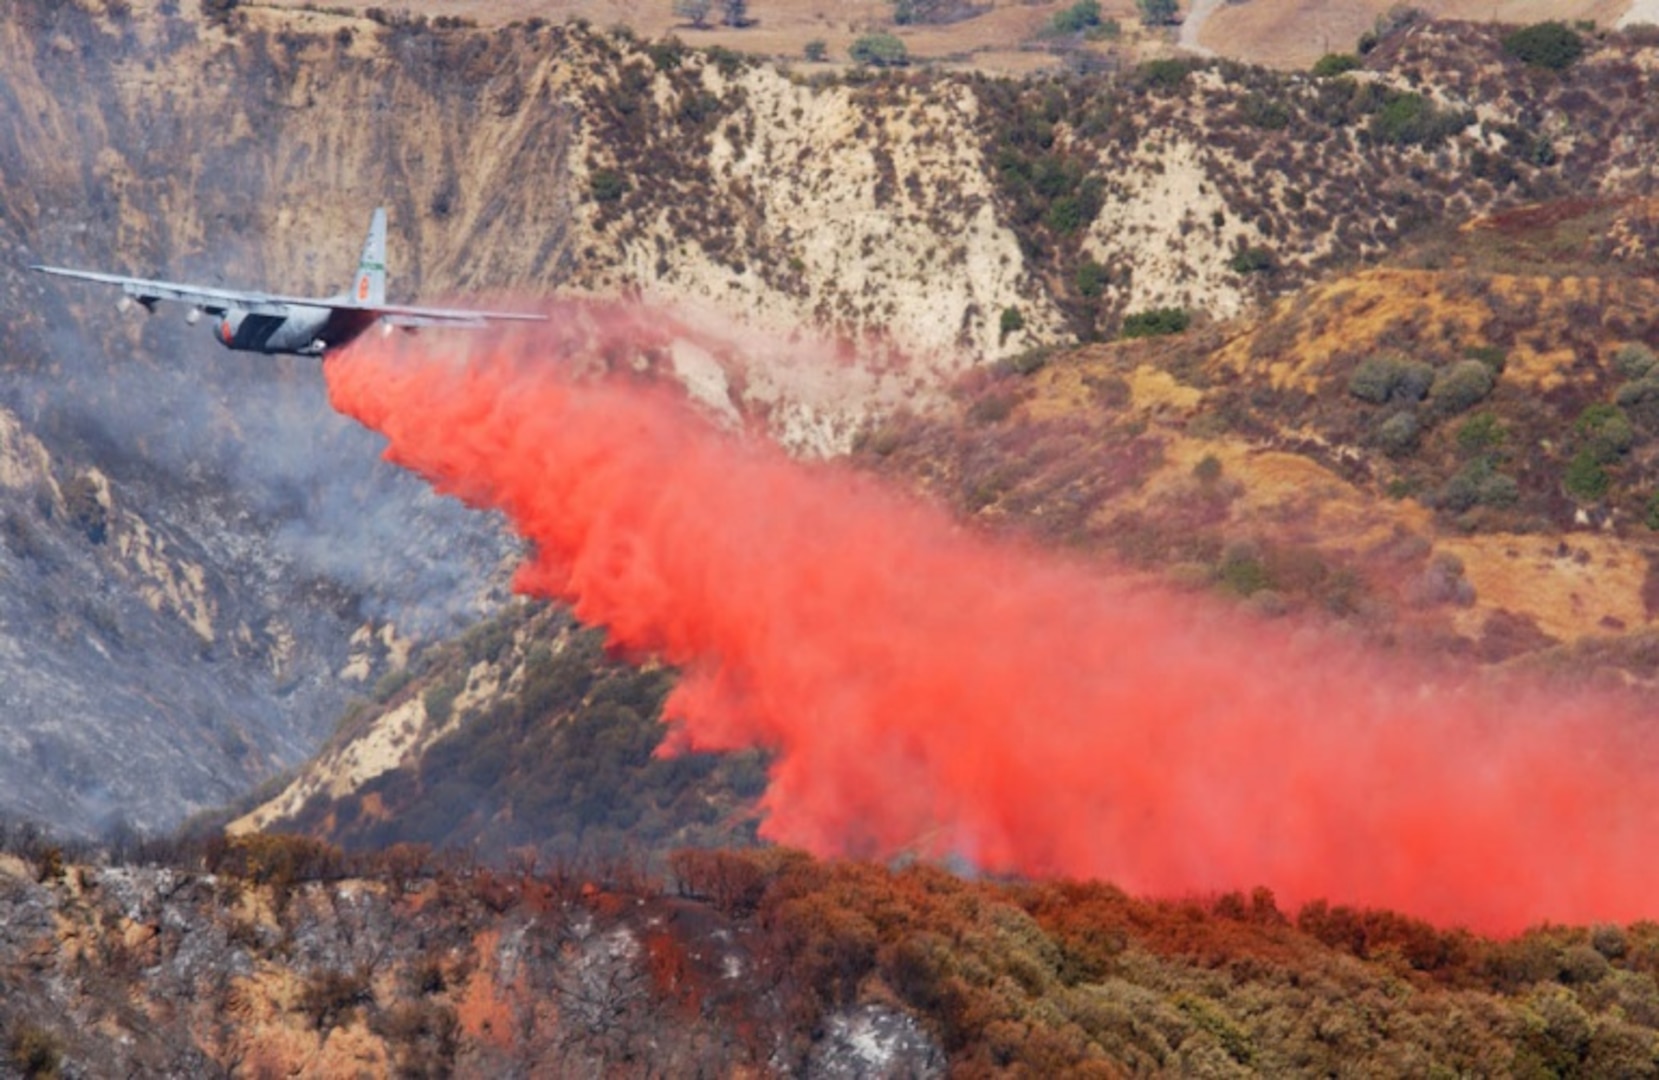 A MAFFS (Modular Airborne Fire Fighting System) equipped C-130E aircraft from the 146th Airlift Wing, Channel Islands Air National Guard Station, makes a Phoschek fire retardant drop on the Simi Fire in Southern California.